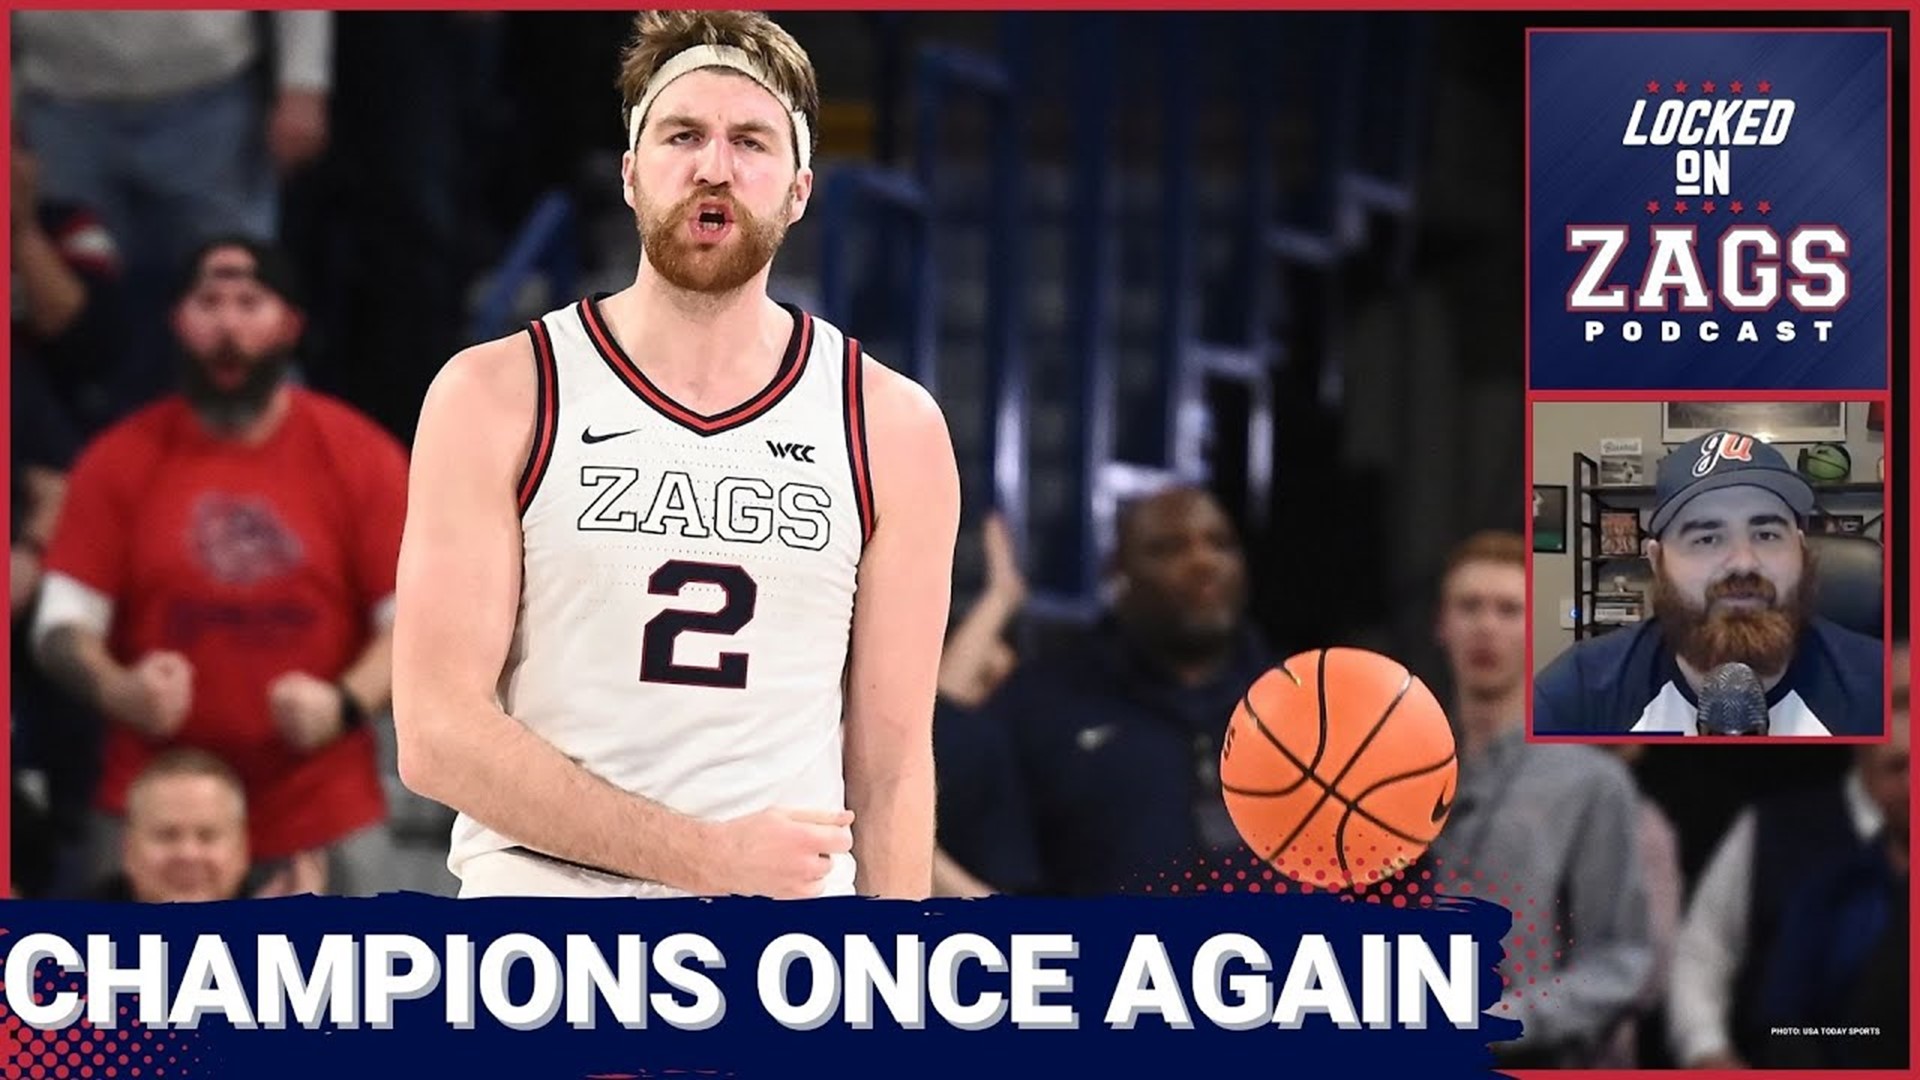 Gonzaga jumped out to a 19-point first-half lead and defeated the Gaels of Saint Mary's at The Kennel, winning a share of the WCC championship.